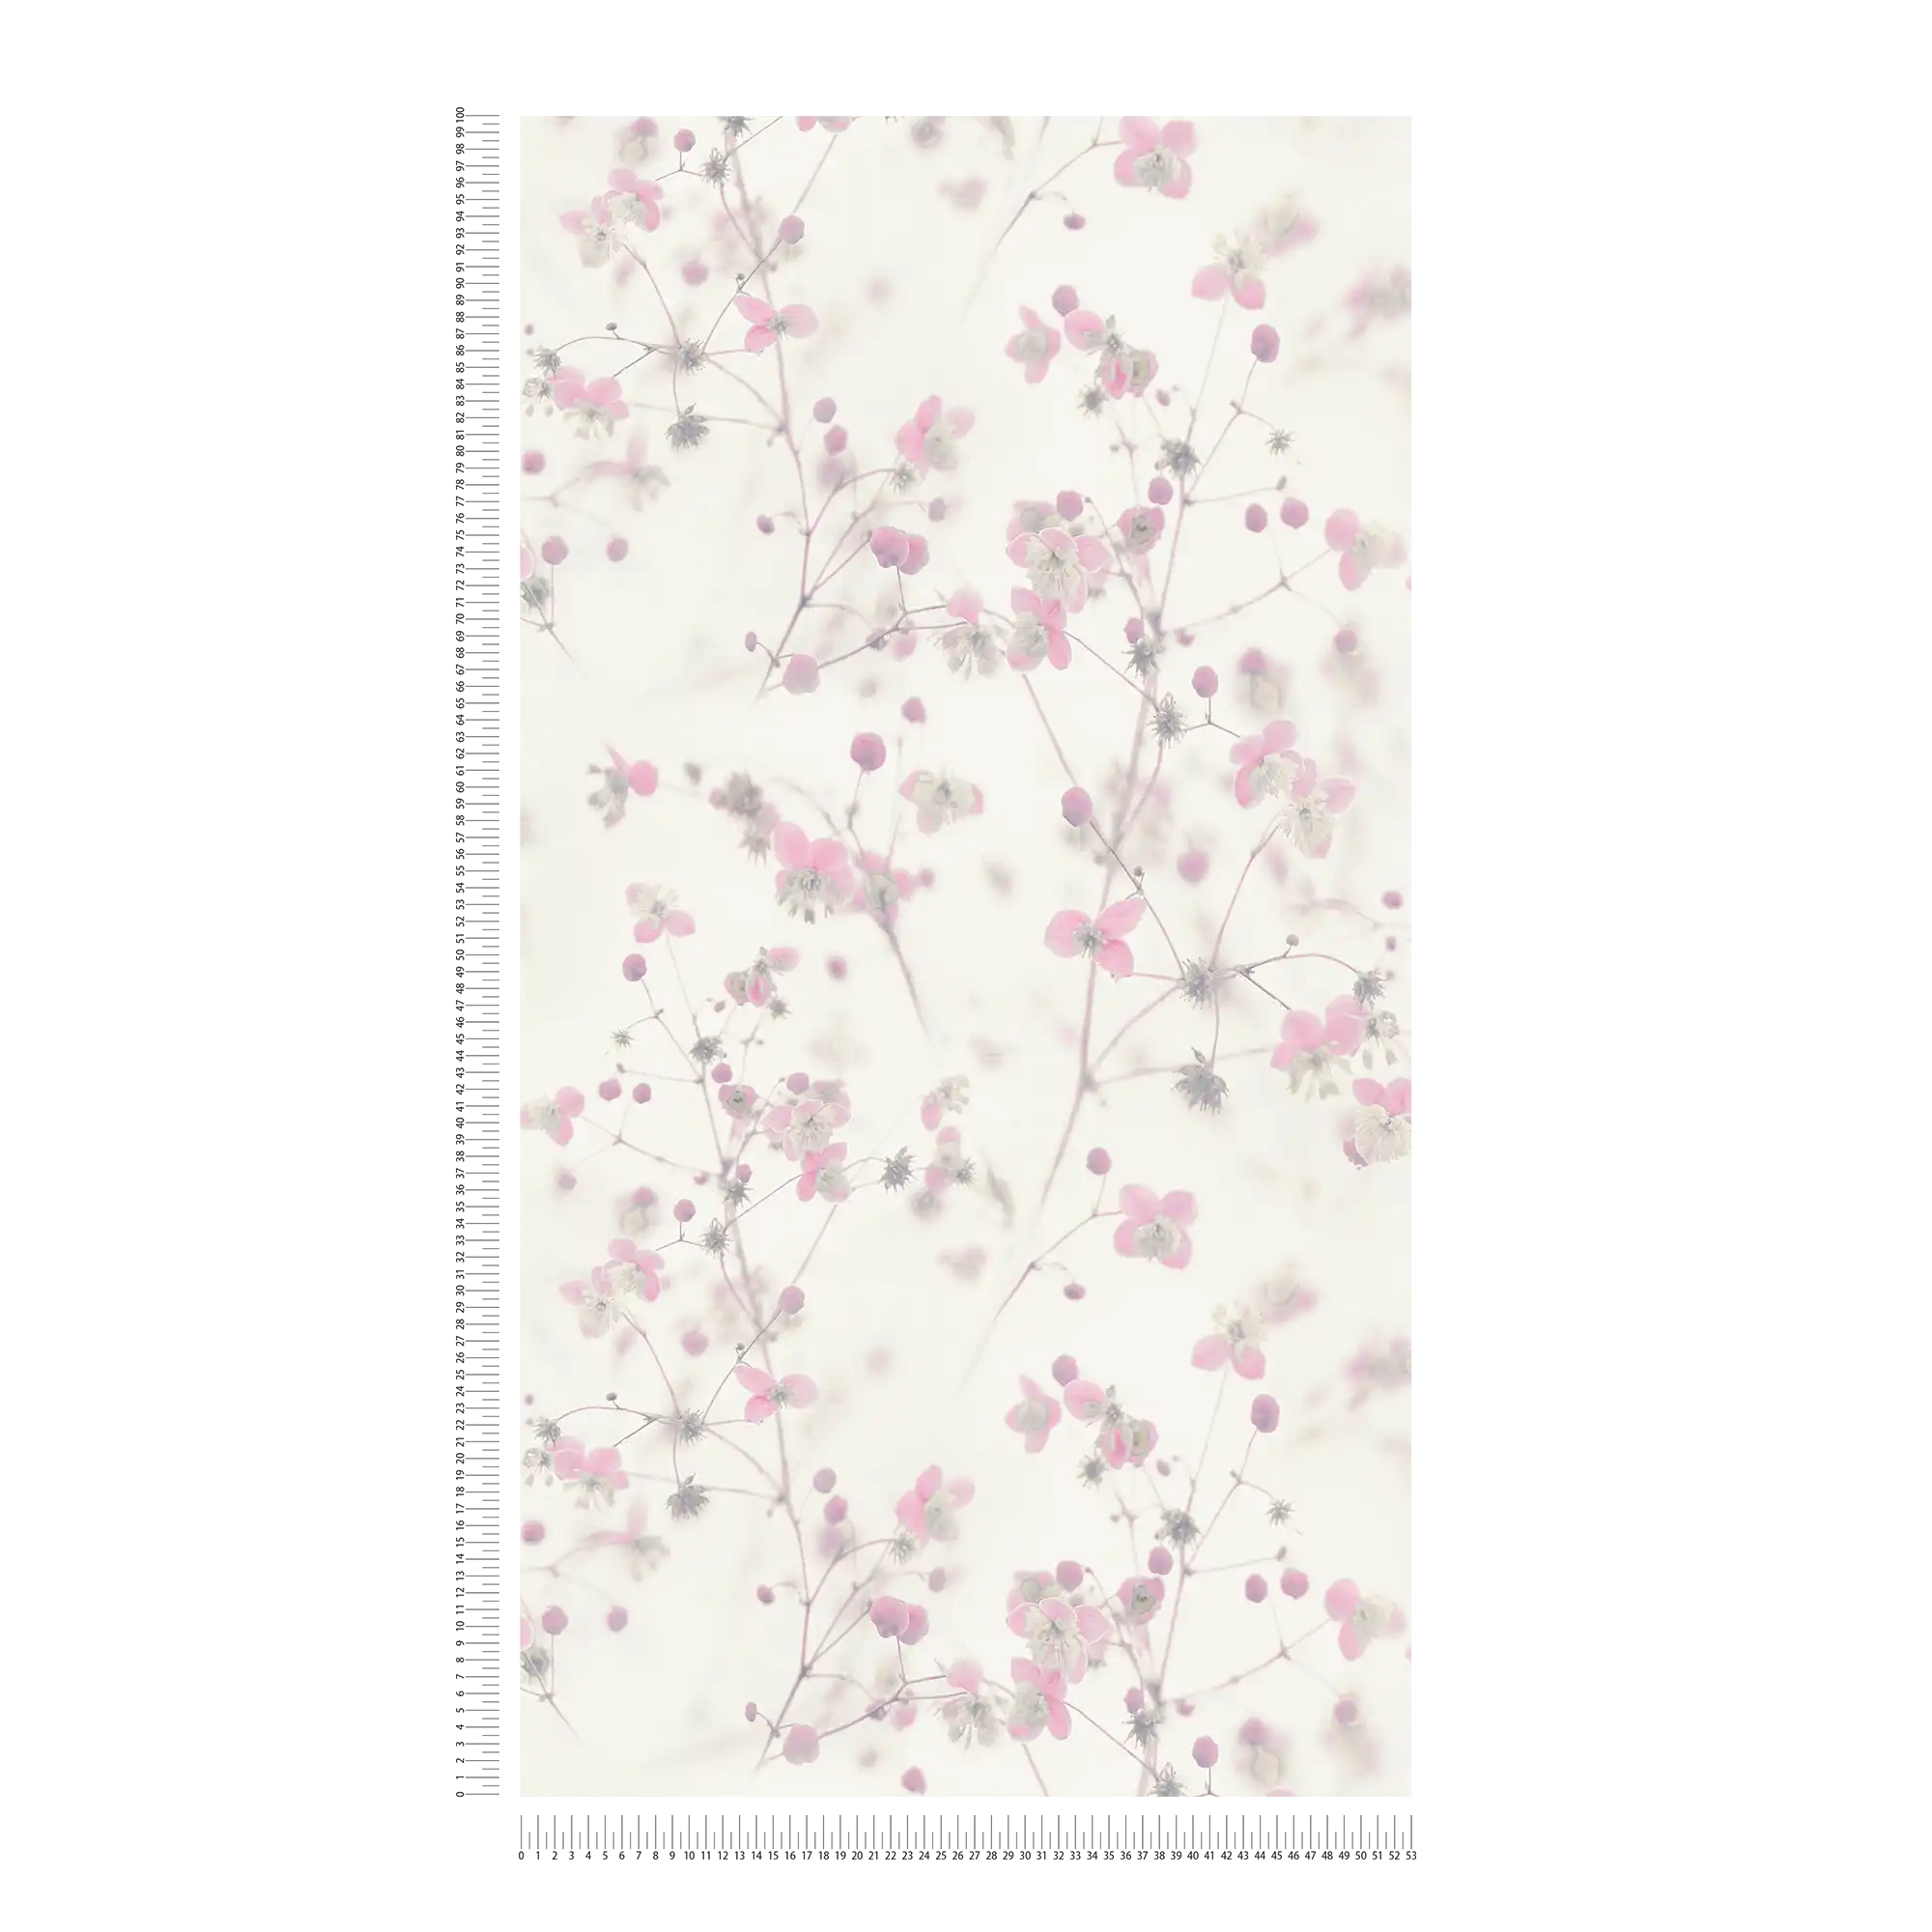             Modern country house wallpaper floral pattern - grey, pink
        